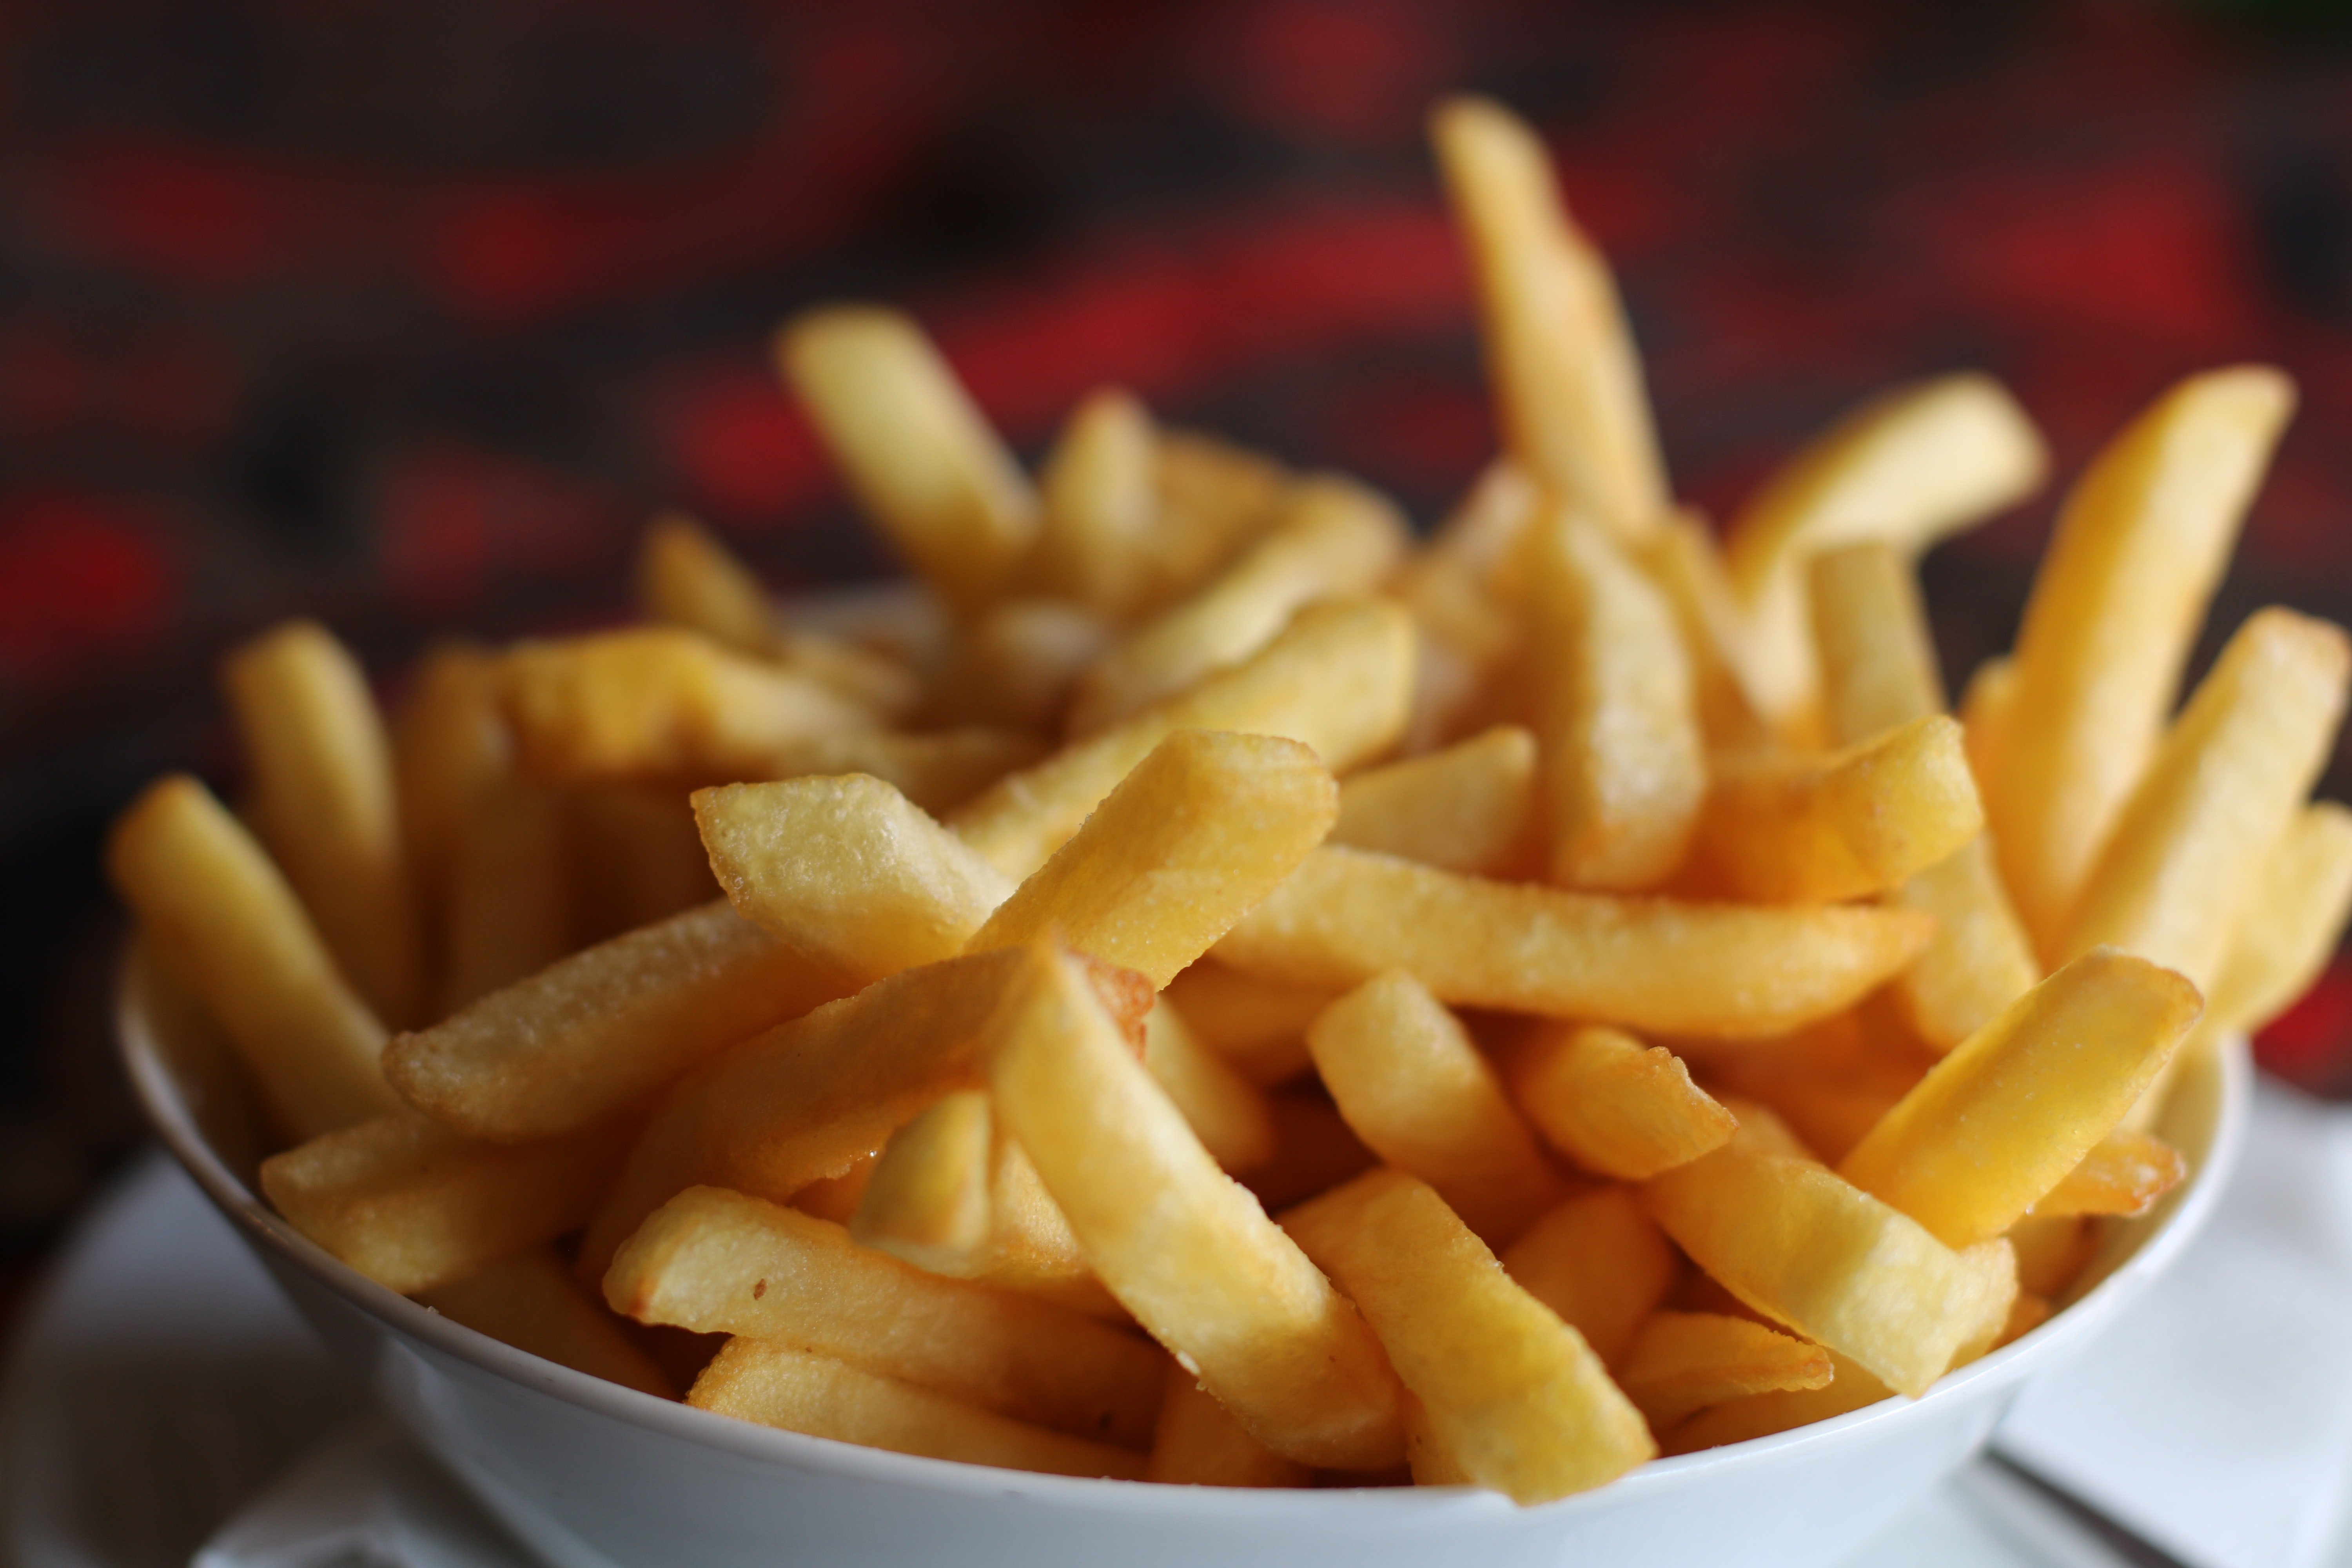 I remember how I used to smell like fast food every night after work | Source: Pexels